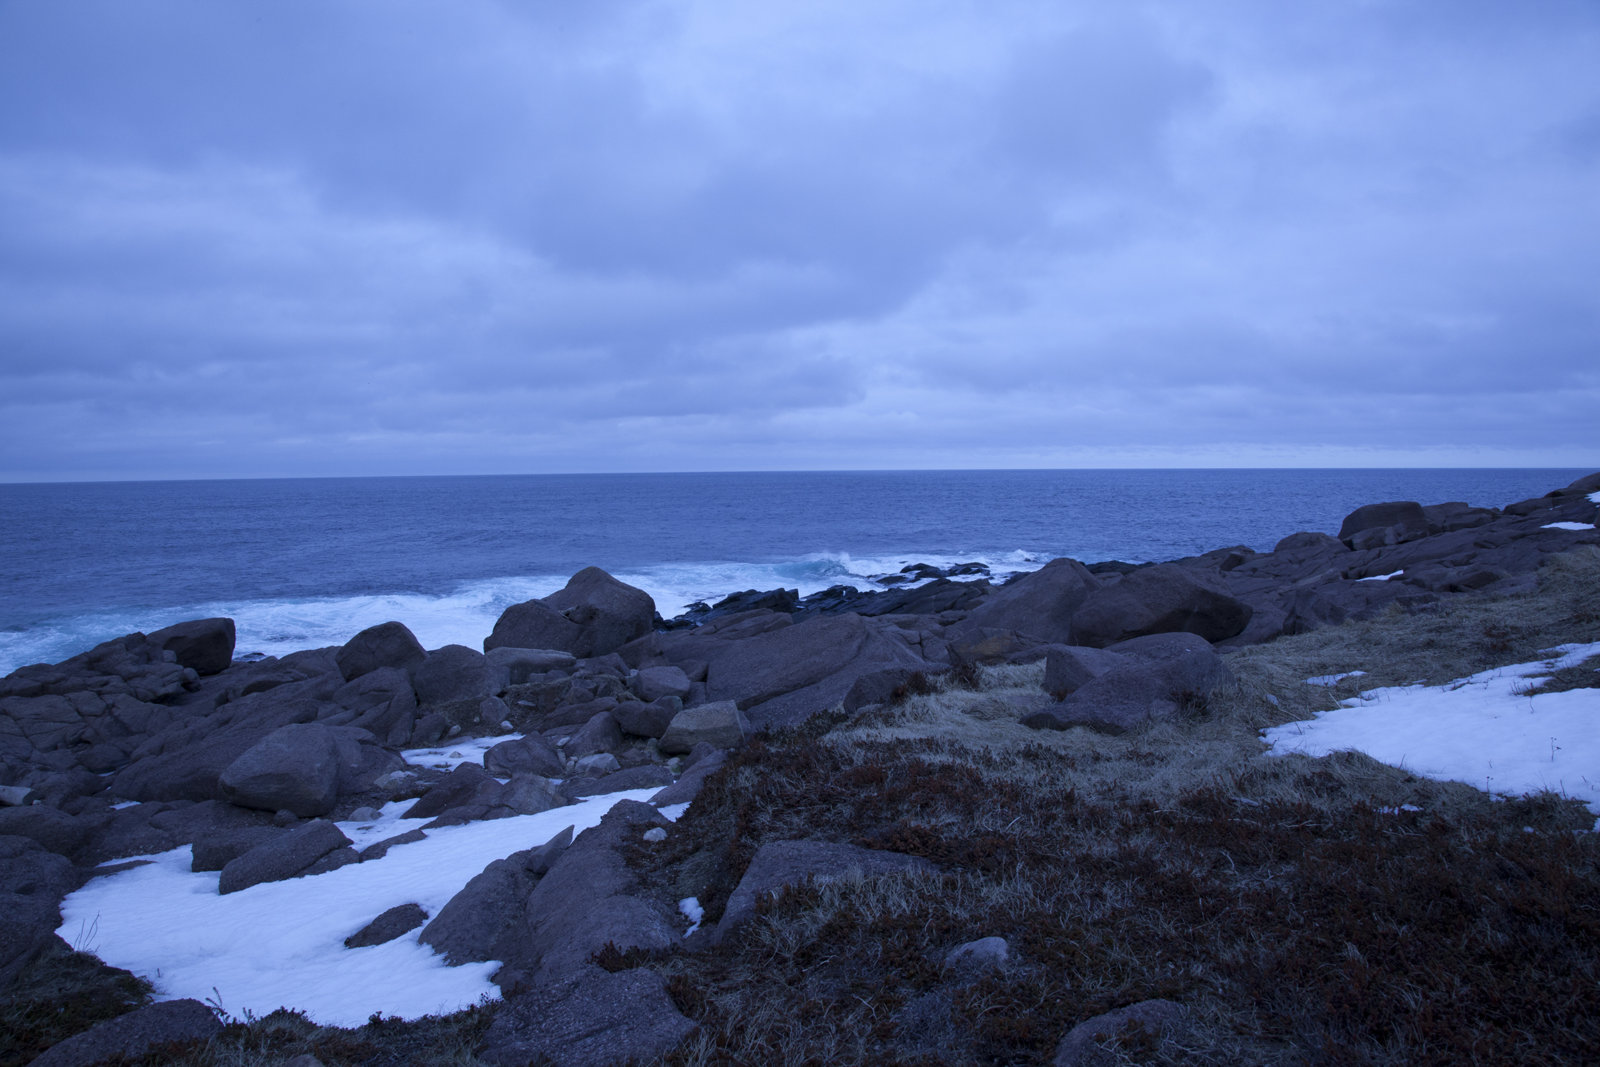 Duane Linklater, Sunrise at Cape Spear, 2011, HD digital video, text from wikipedia conversations, artist story (handout), dimensions variable  